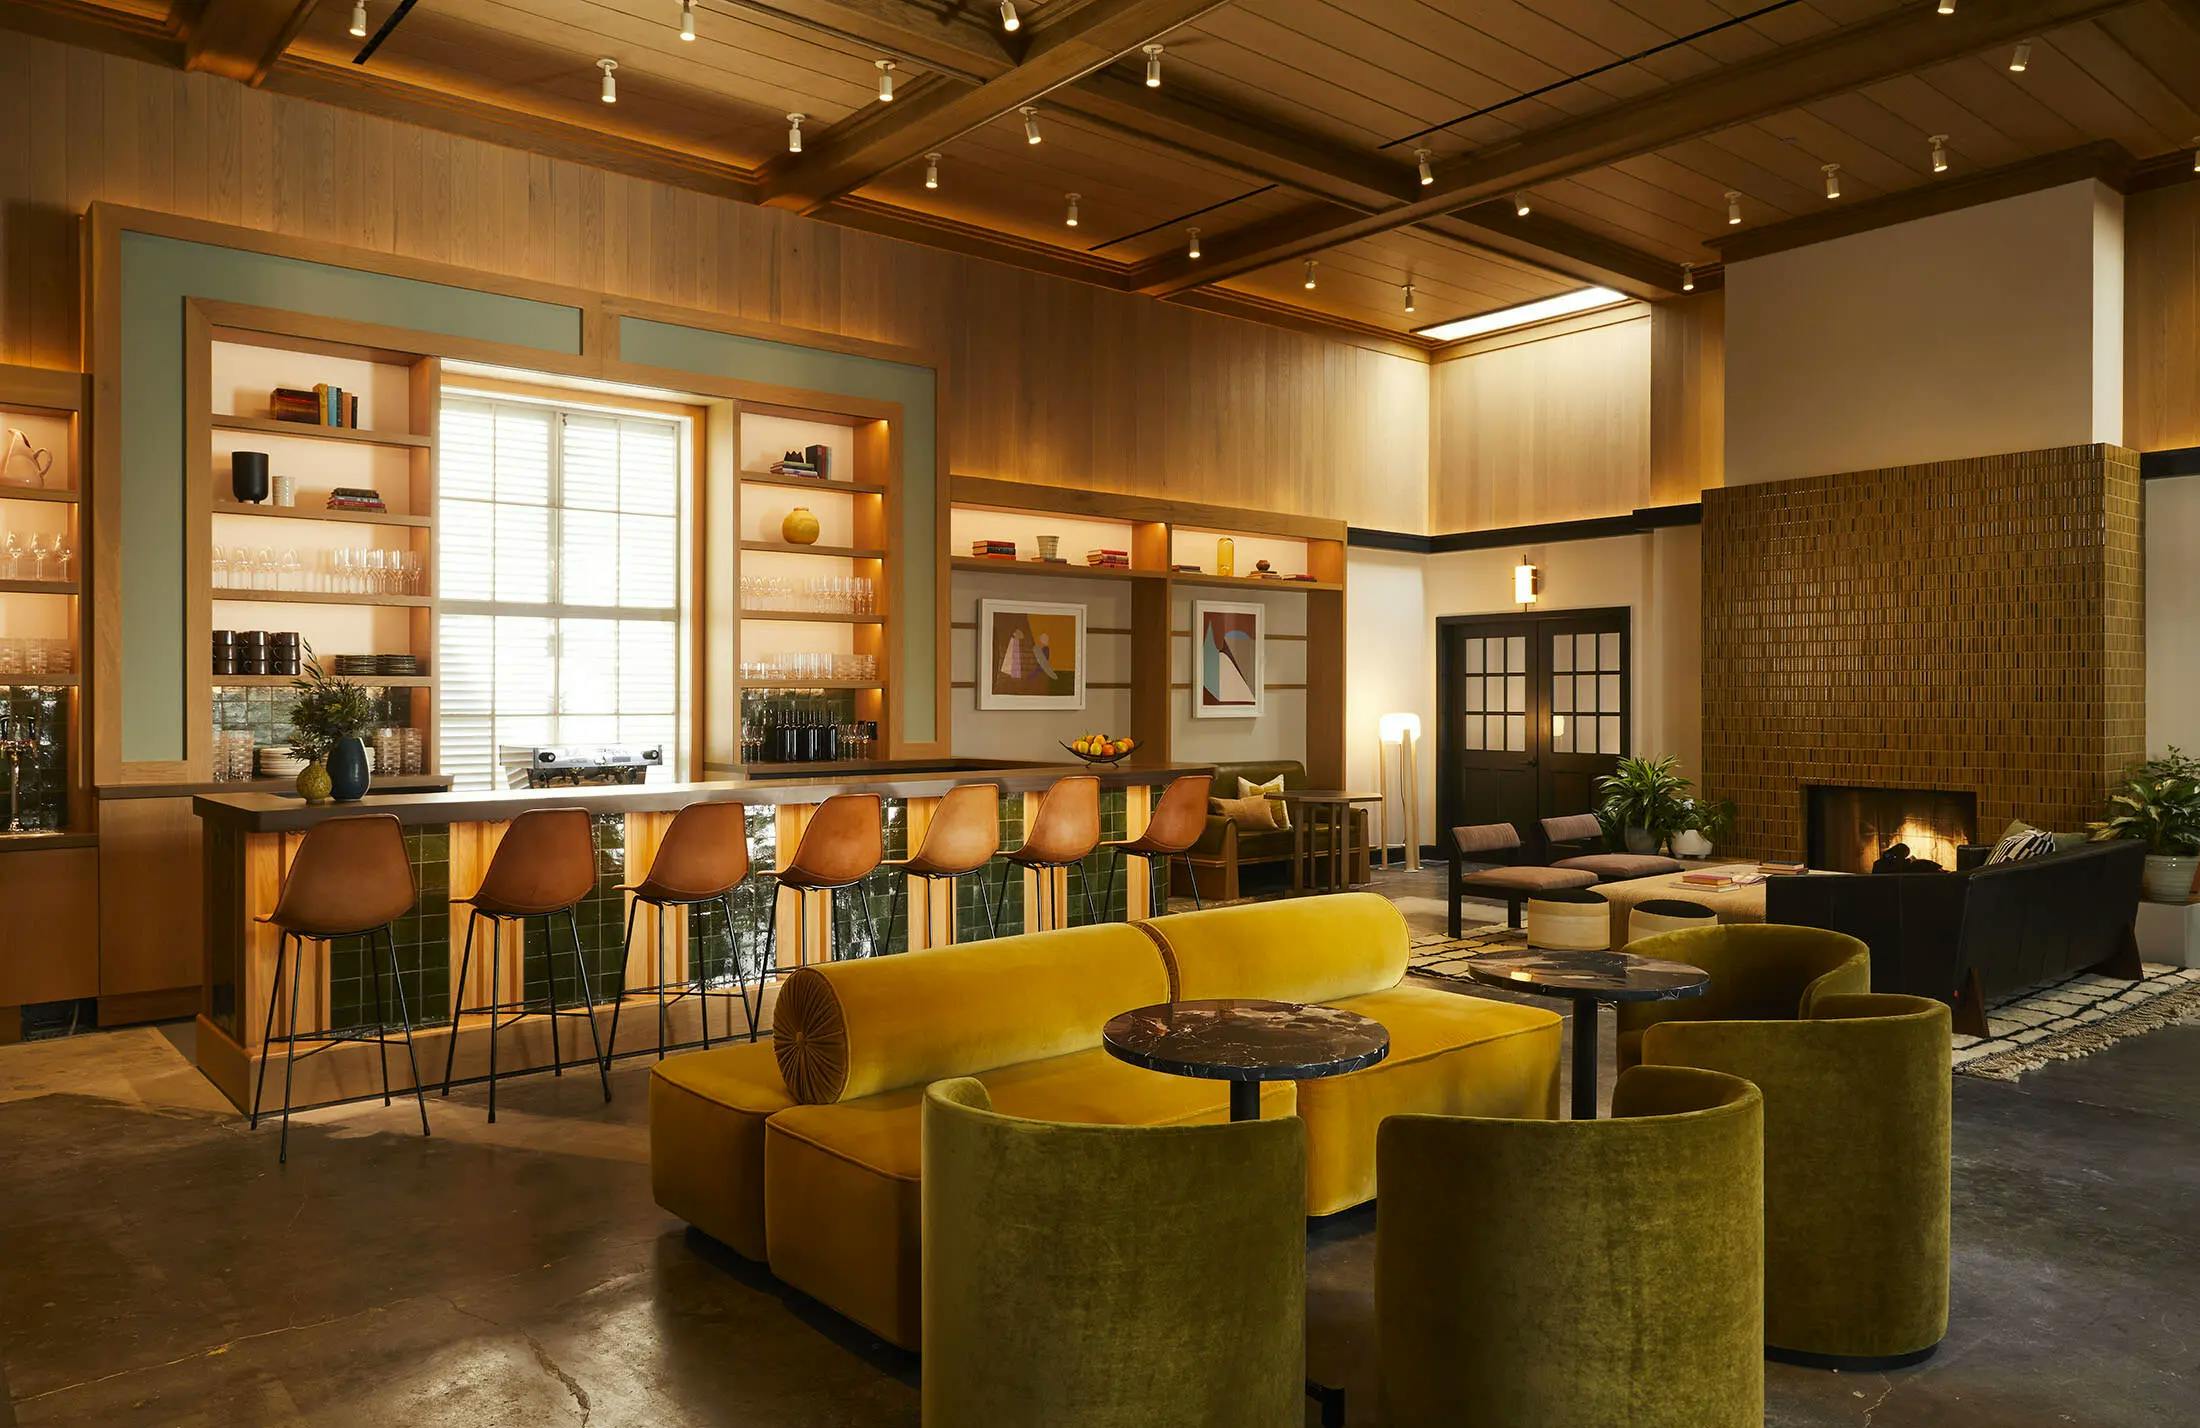 A bar within a lounge area at the Chief Los Angeles Clubhouse with an assortment of velvet chairs and sofas.